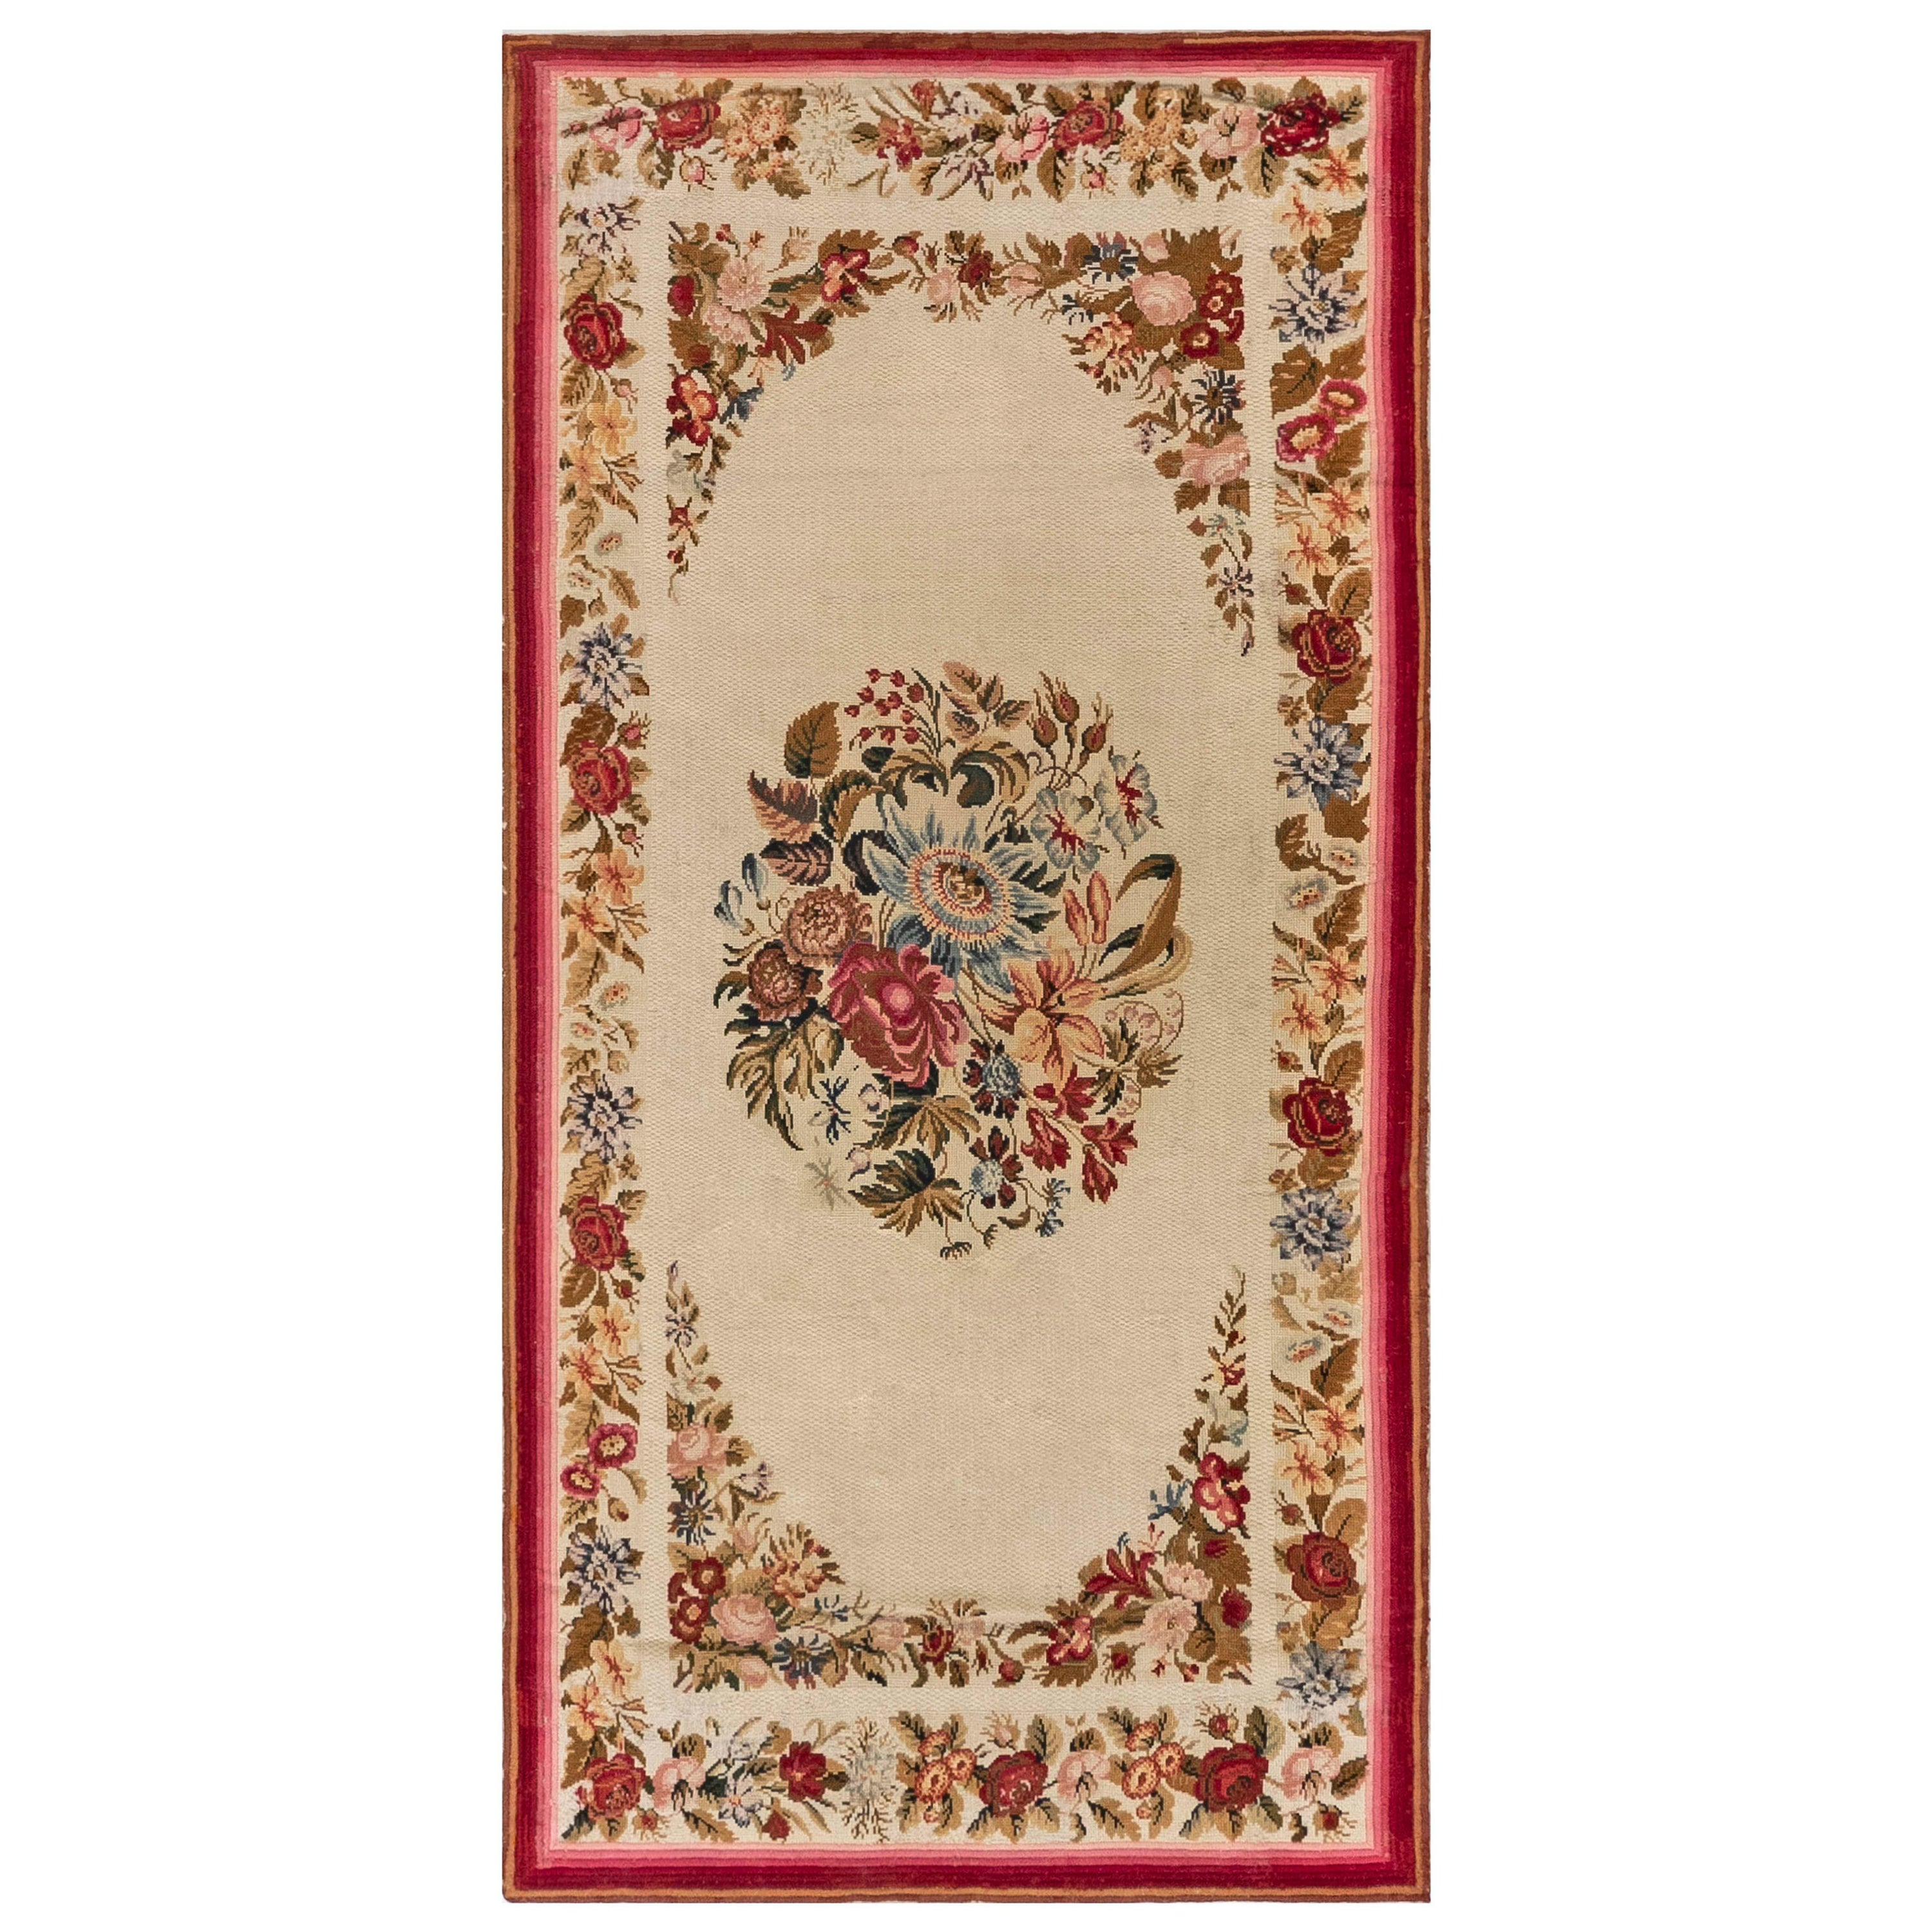 Early 20th Century English Floral Needlework Rug For Sale